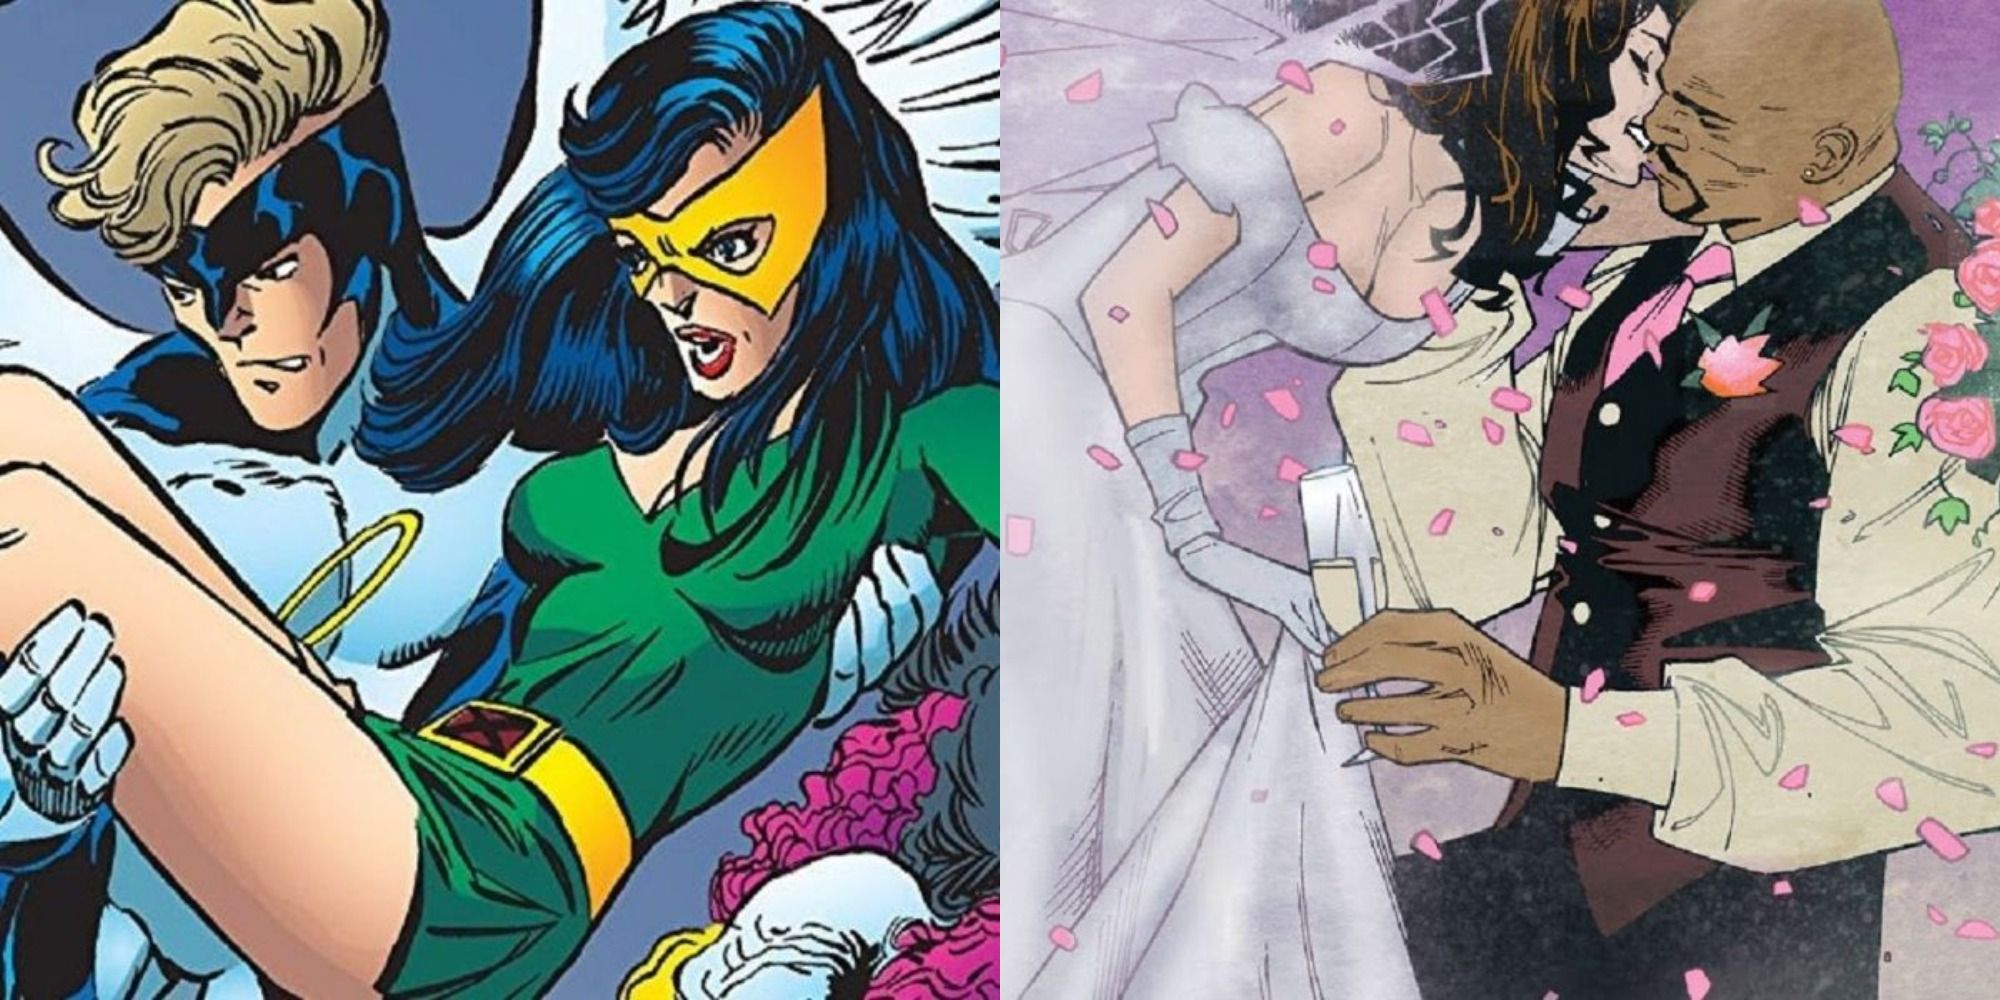 Luke Cage & Jessica Jones; Angel & Candy Southern in the Defenders comics